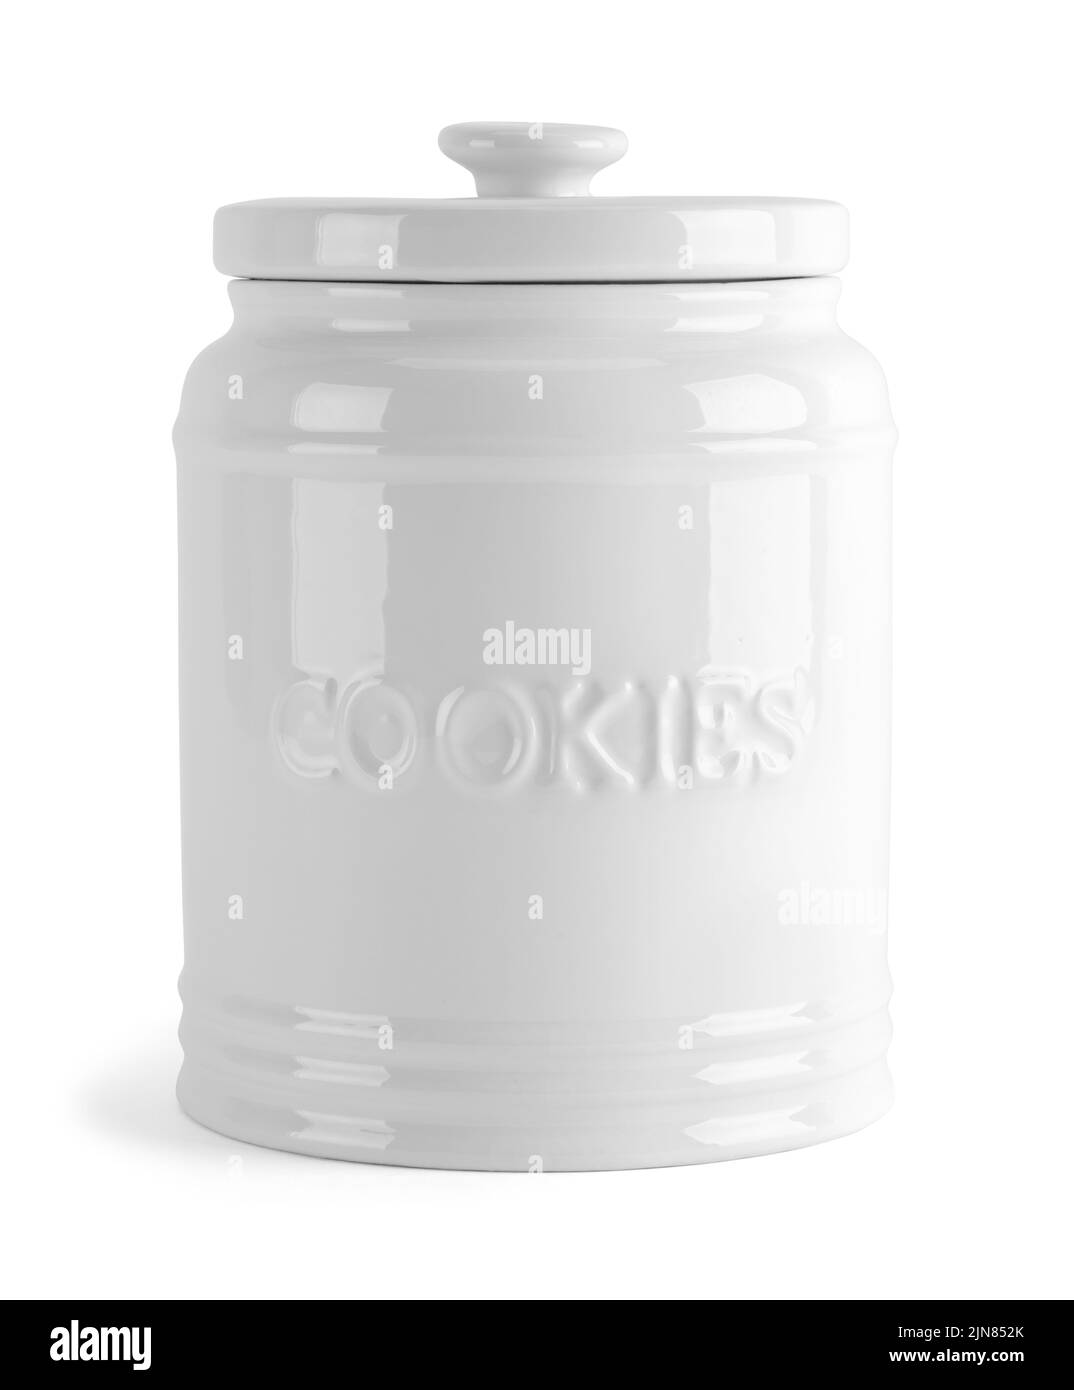 Ceramic Cookie Jar Cut Out On White. Stock Photo